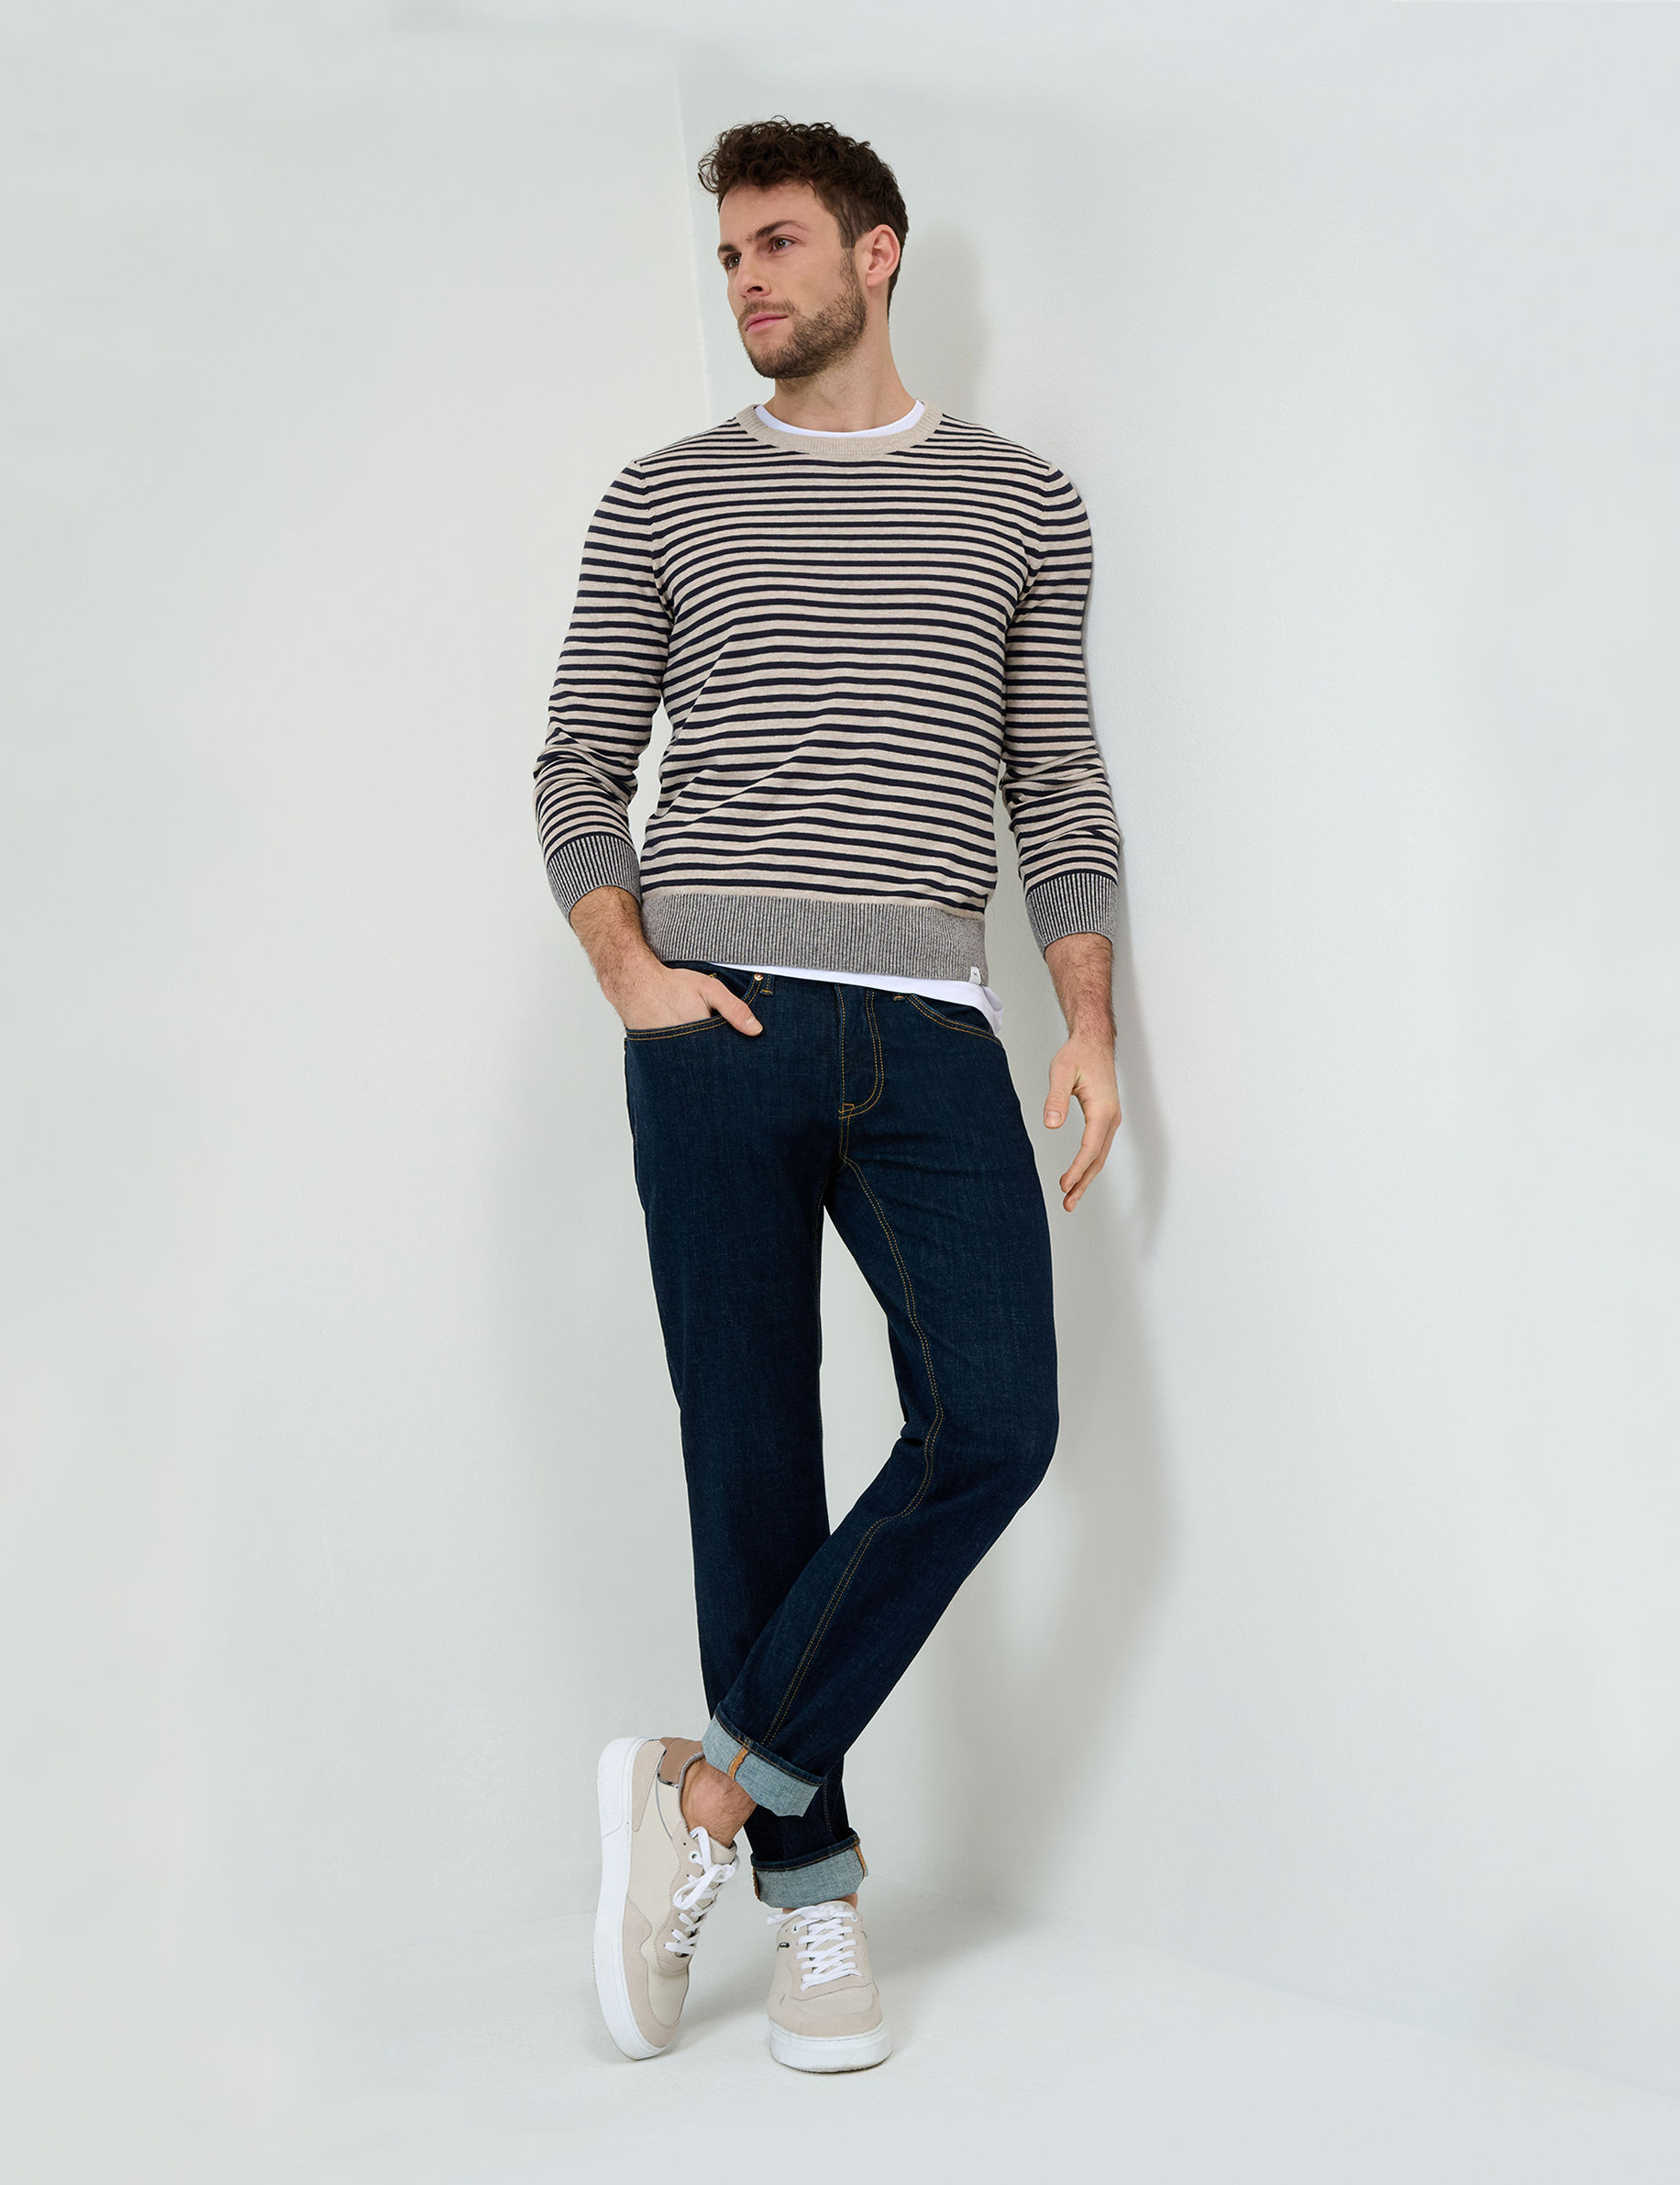 Men Style CHRIS RAW Slim Fit Model Outfit